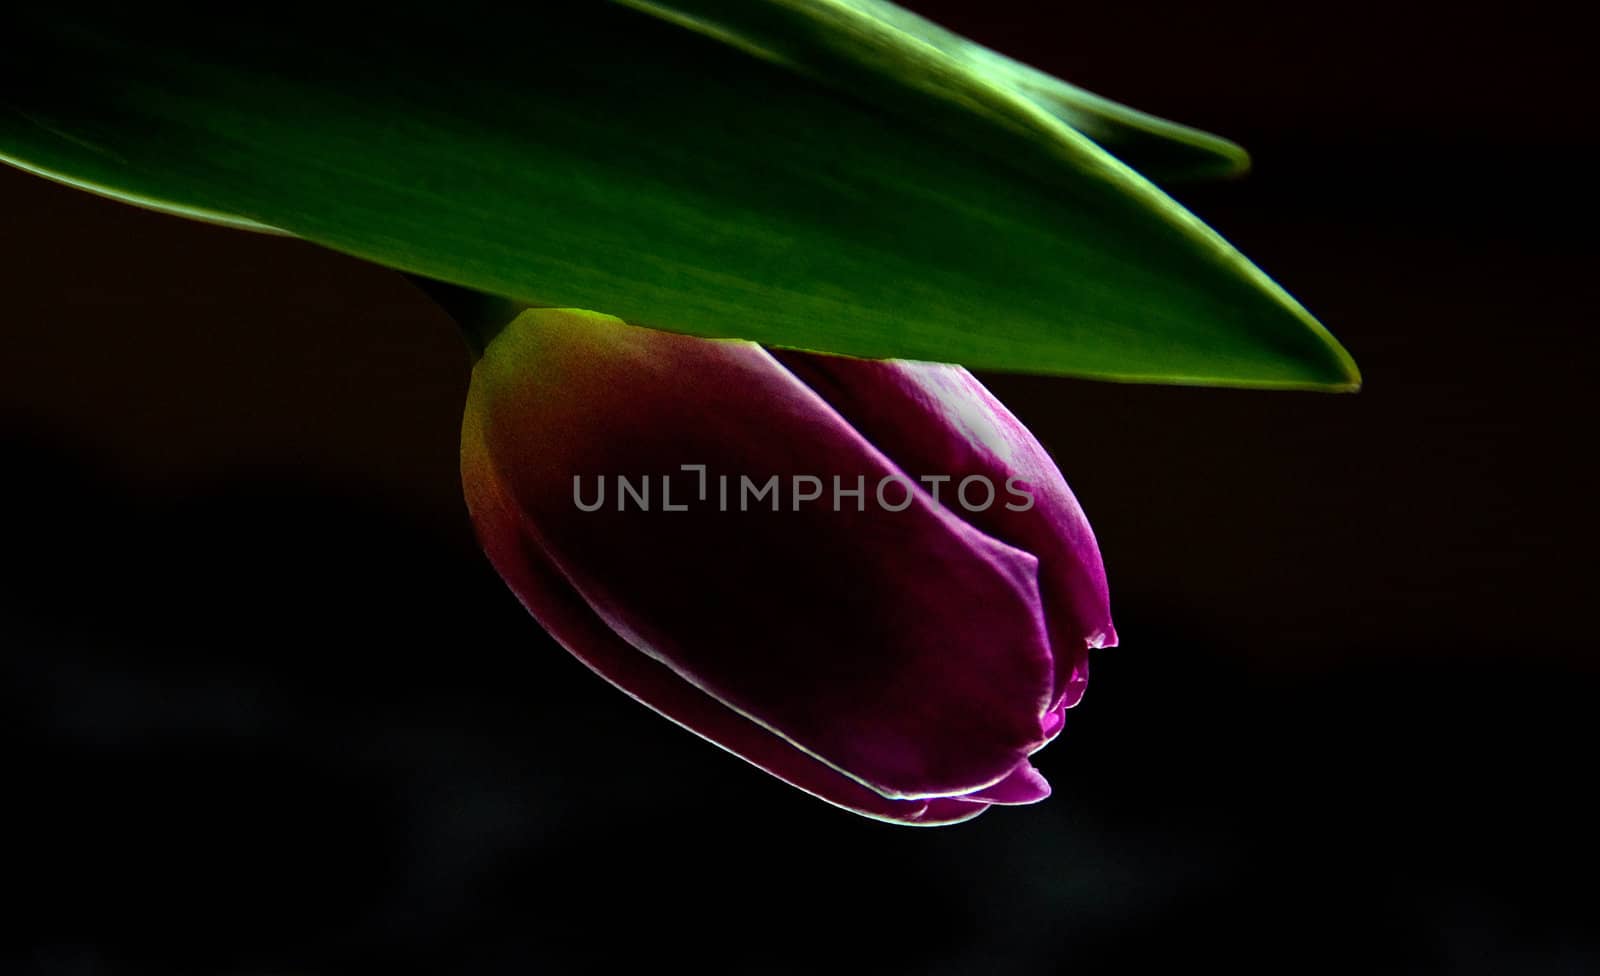 A lilac tulip in backlight with dark background.